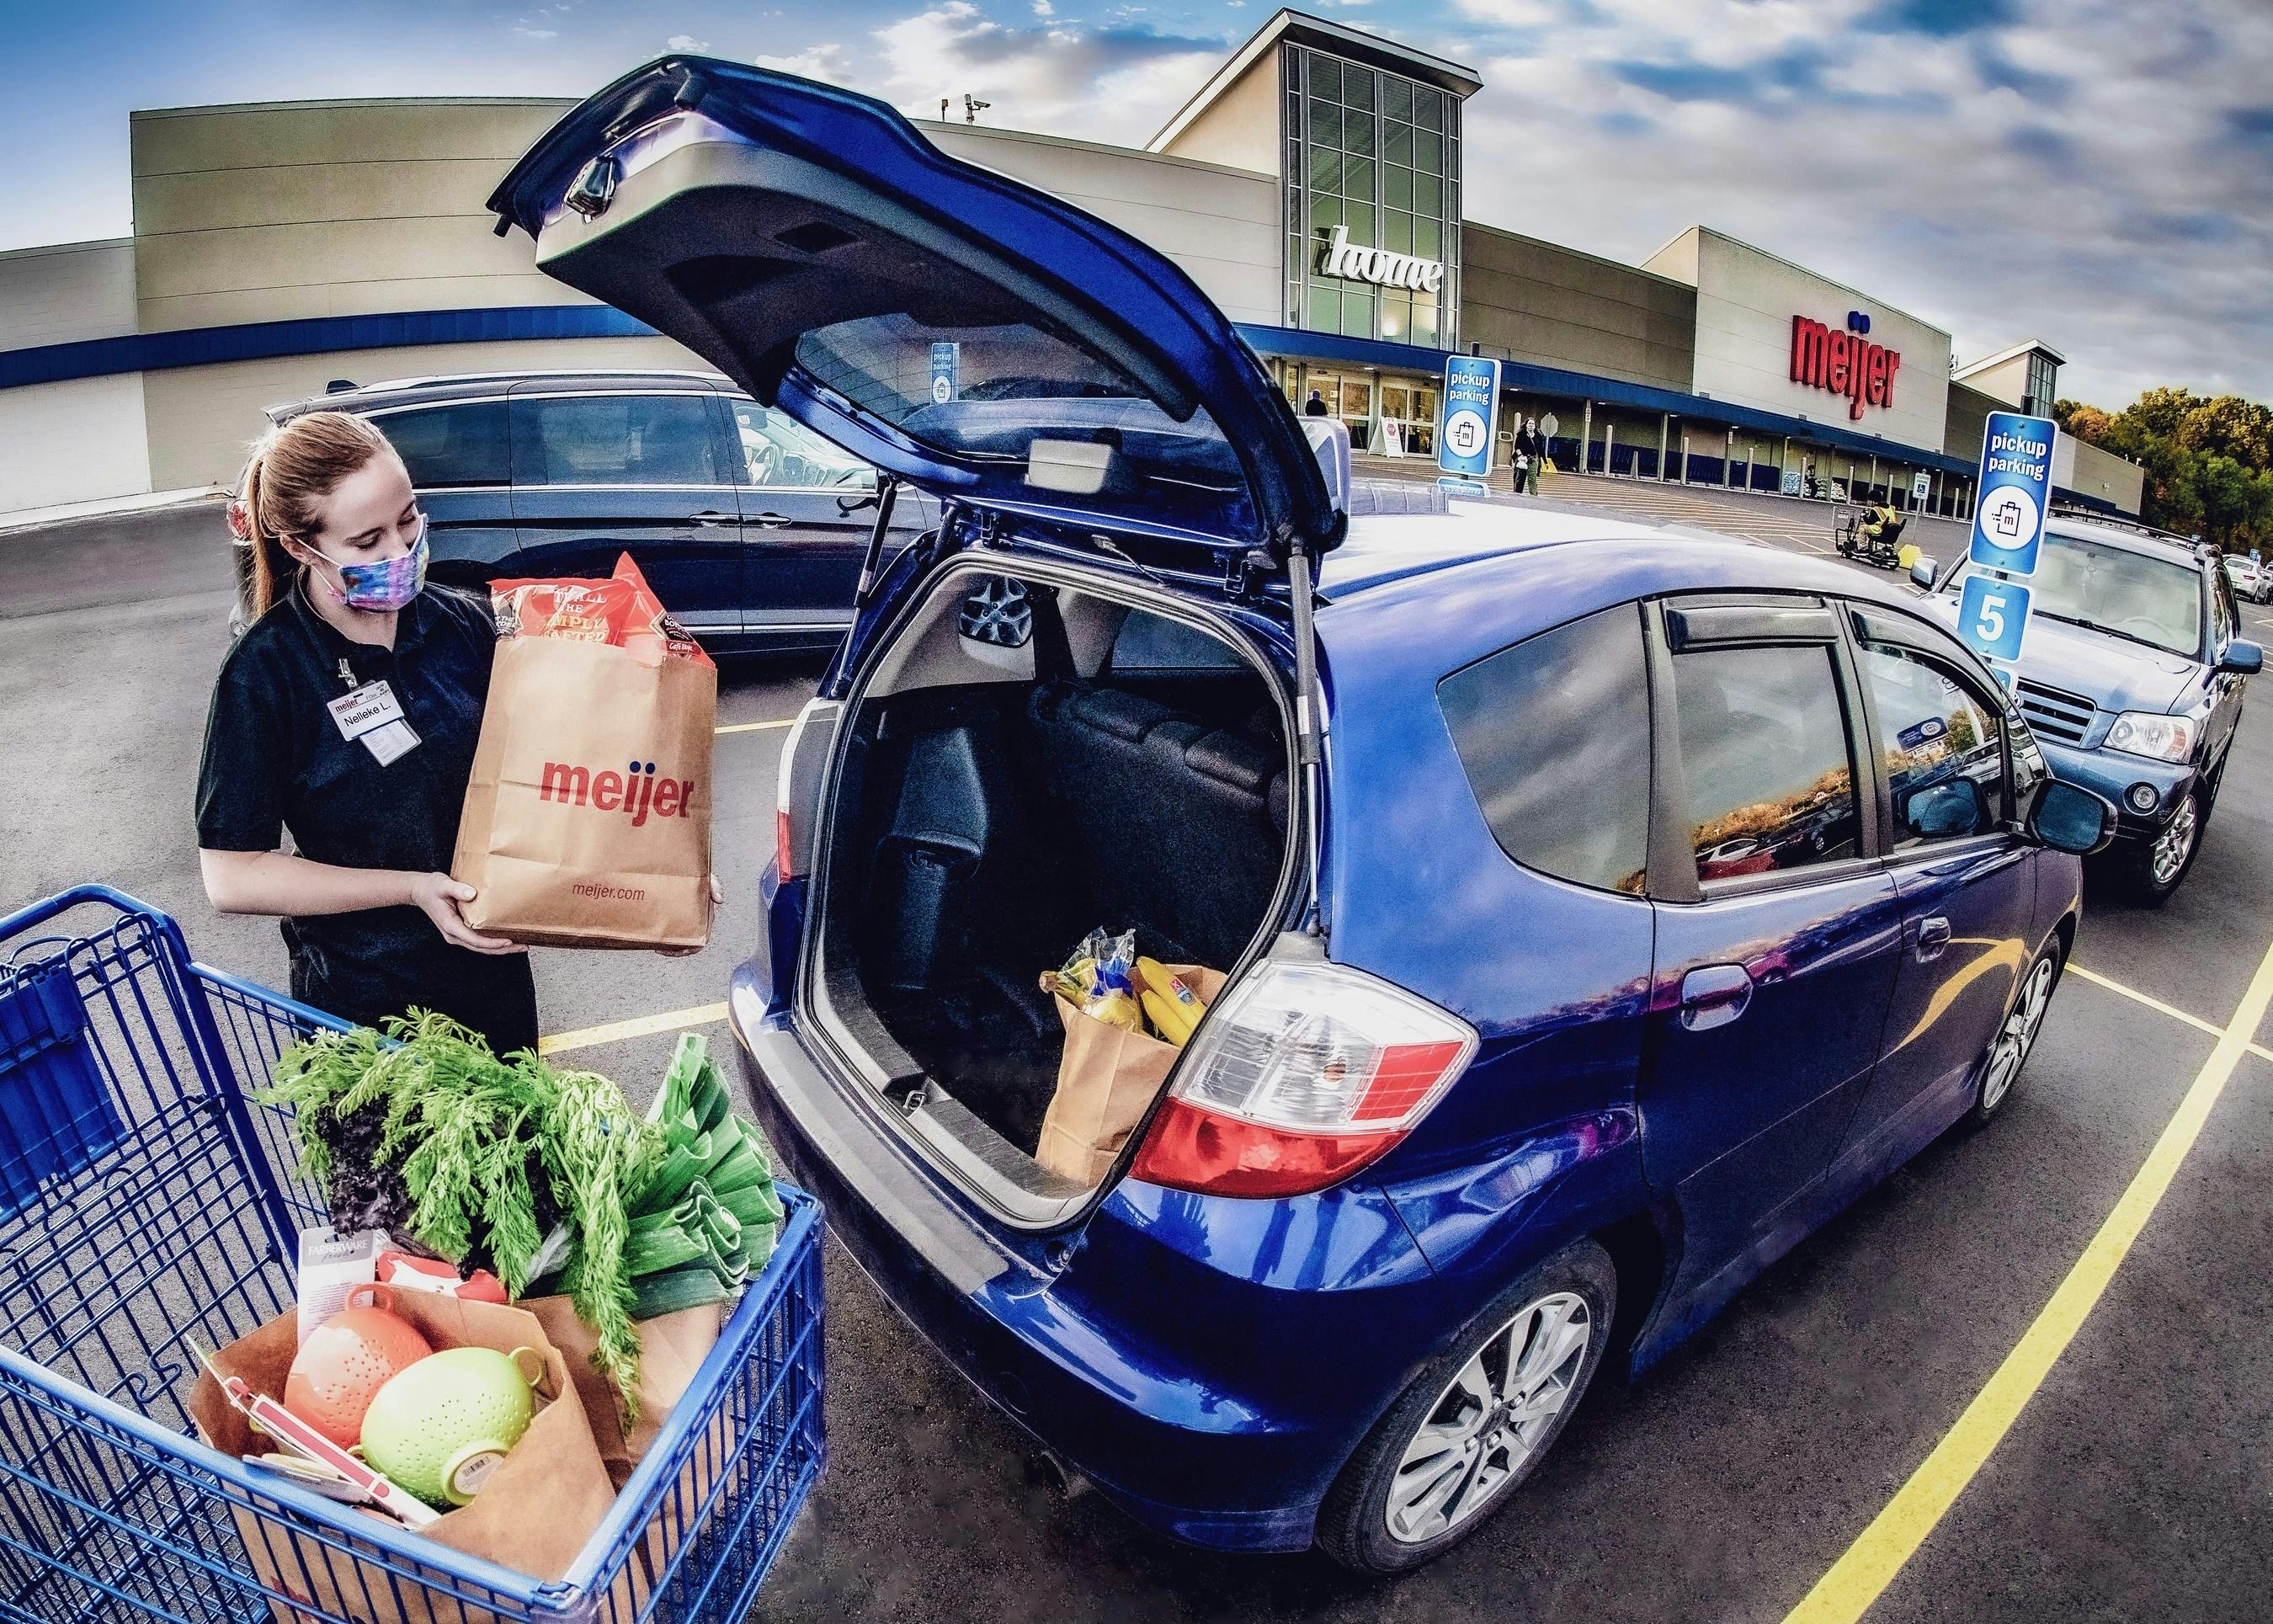 Meijer employee loading a trunk with groceries at a Meijer store.